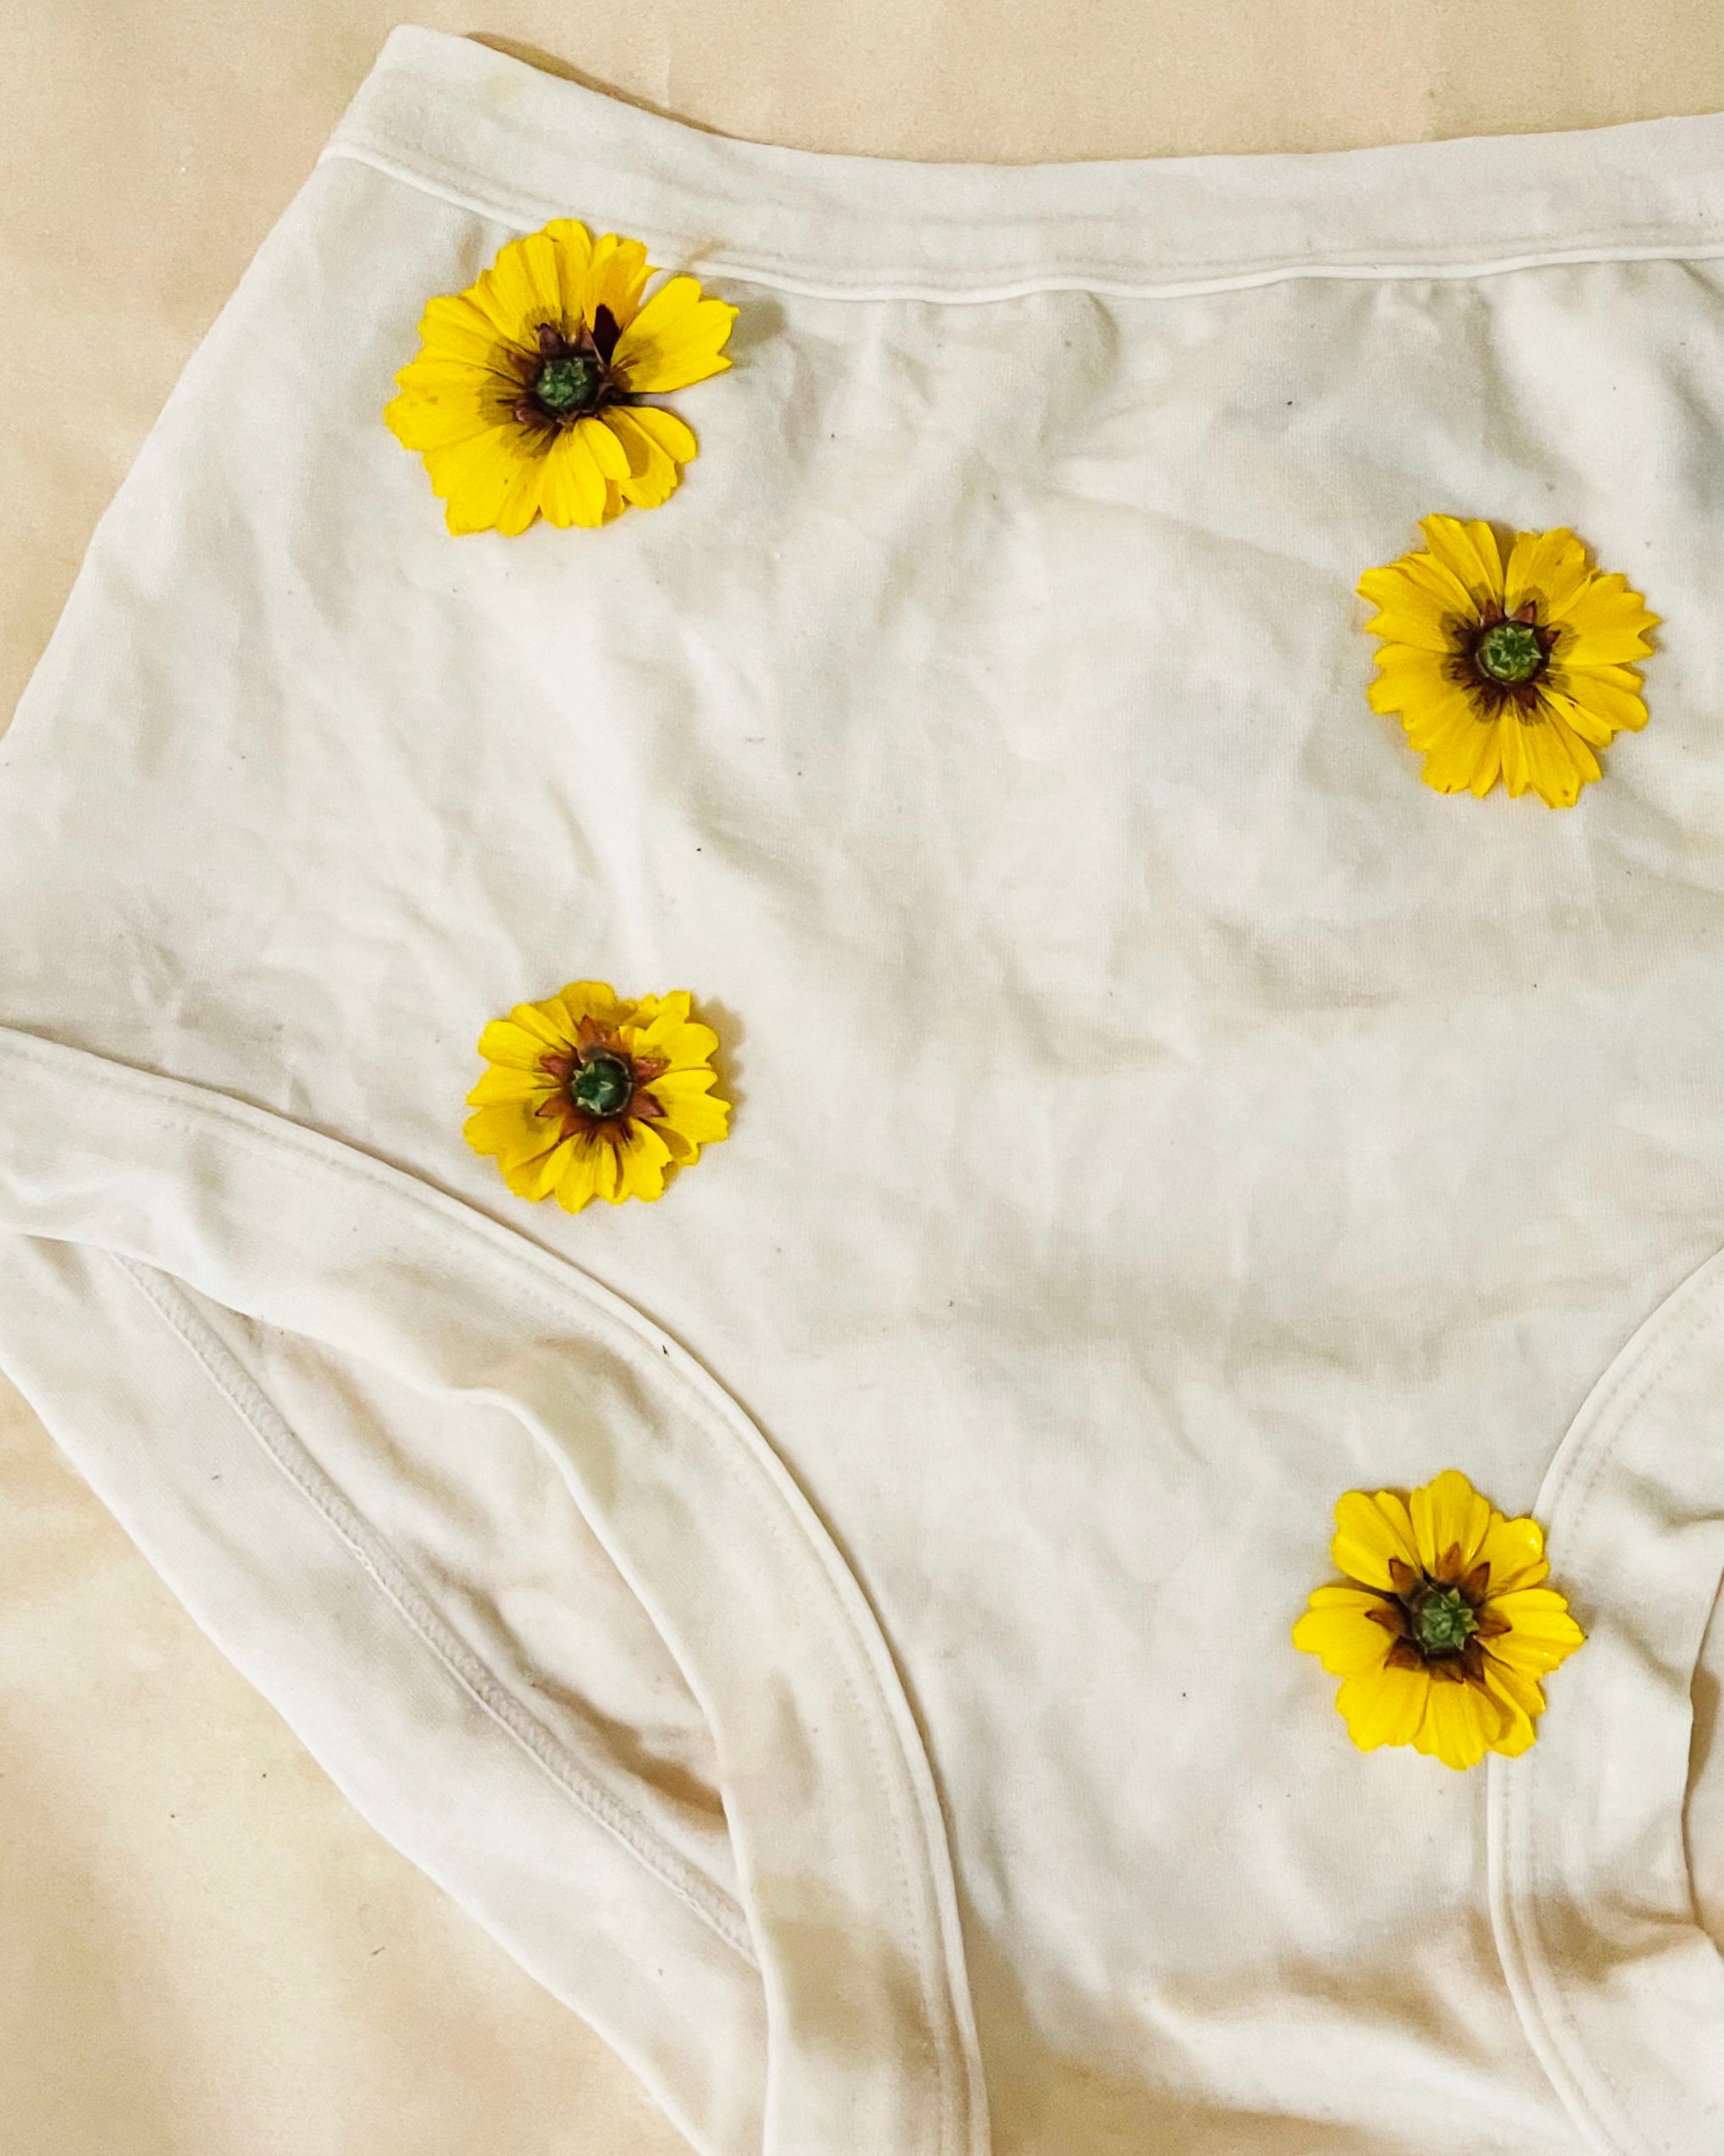 Close up photo of the dying process with fresh flowers placed on underwear before rolling and steaming.